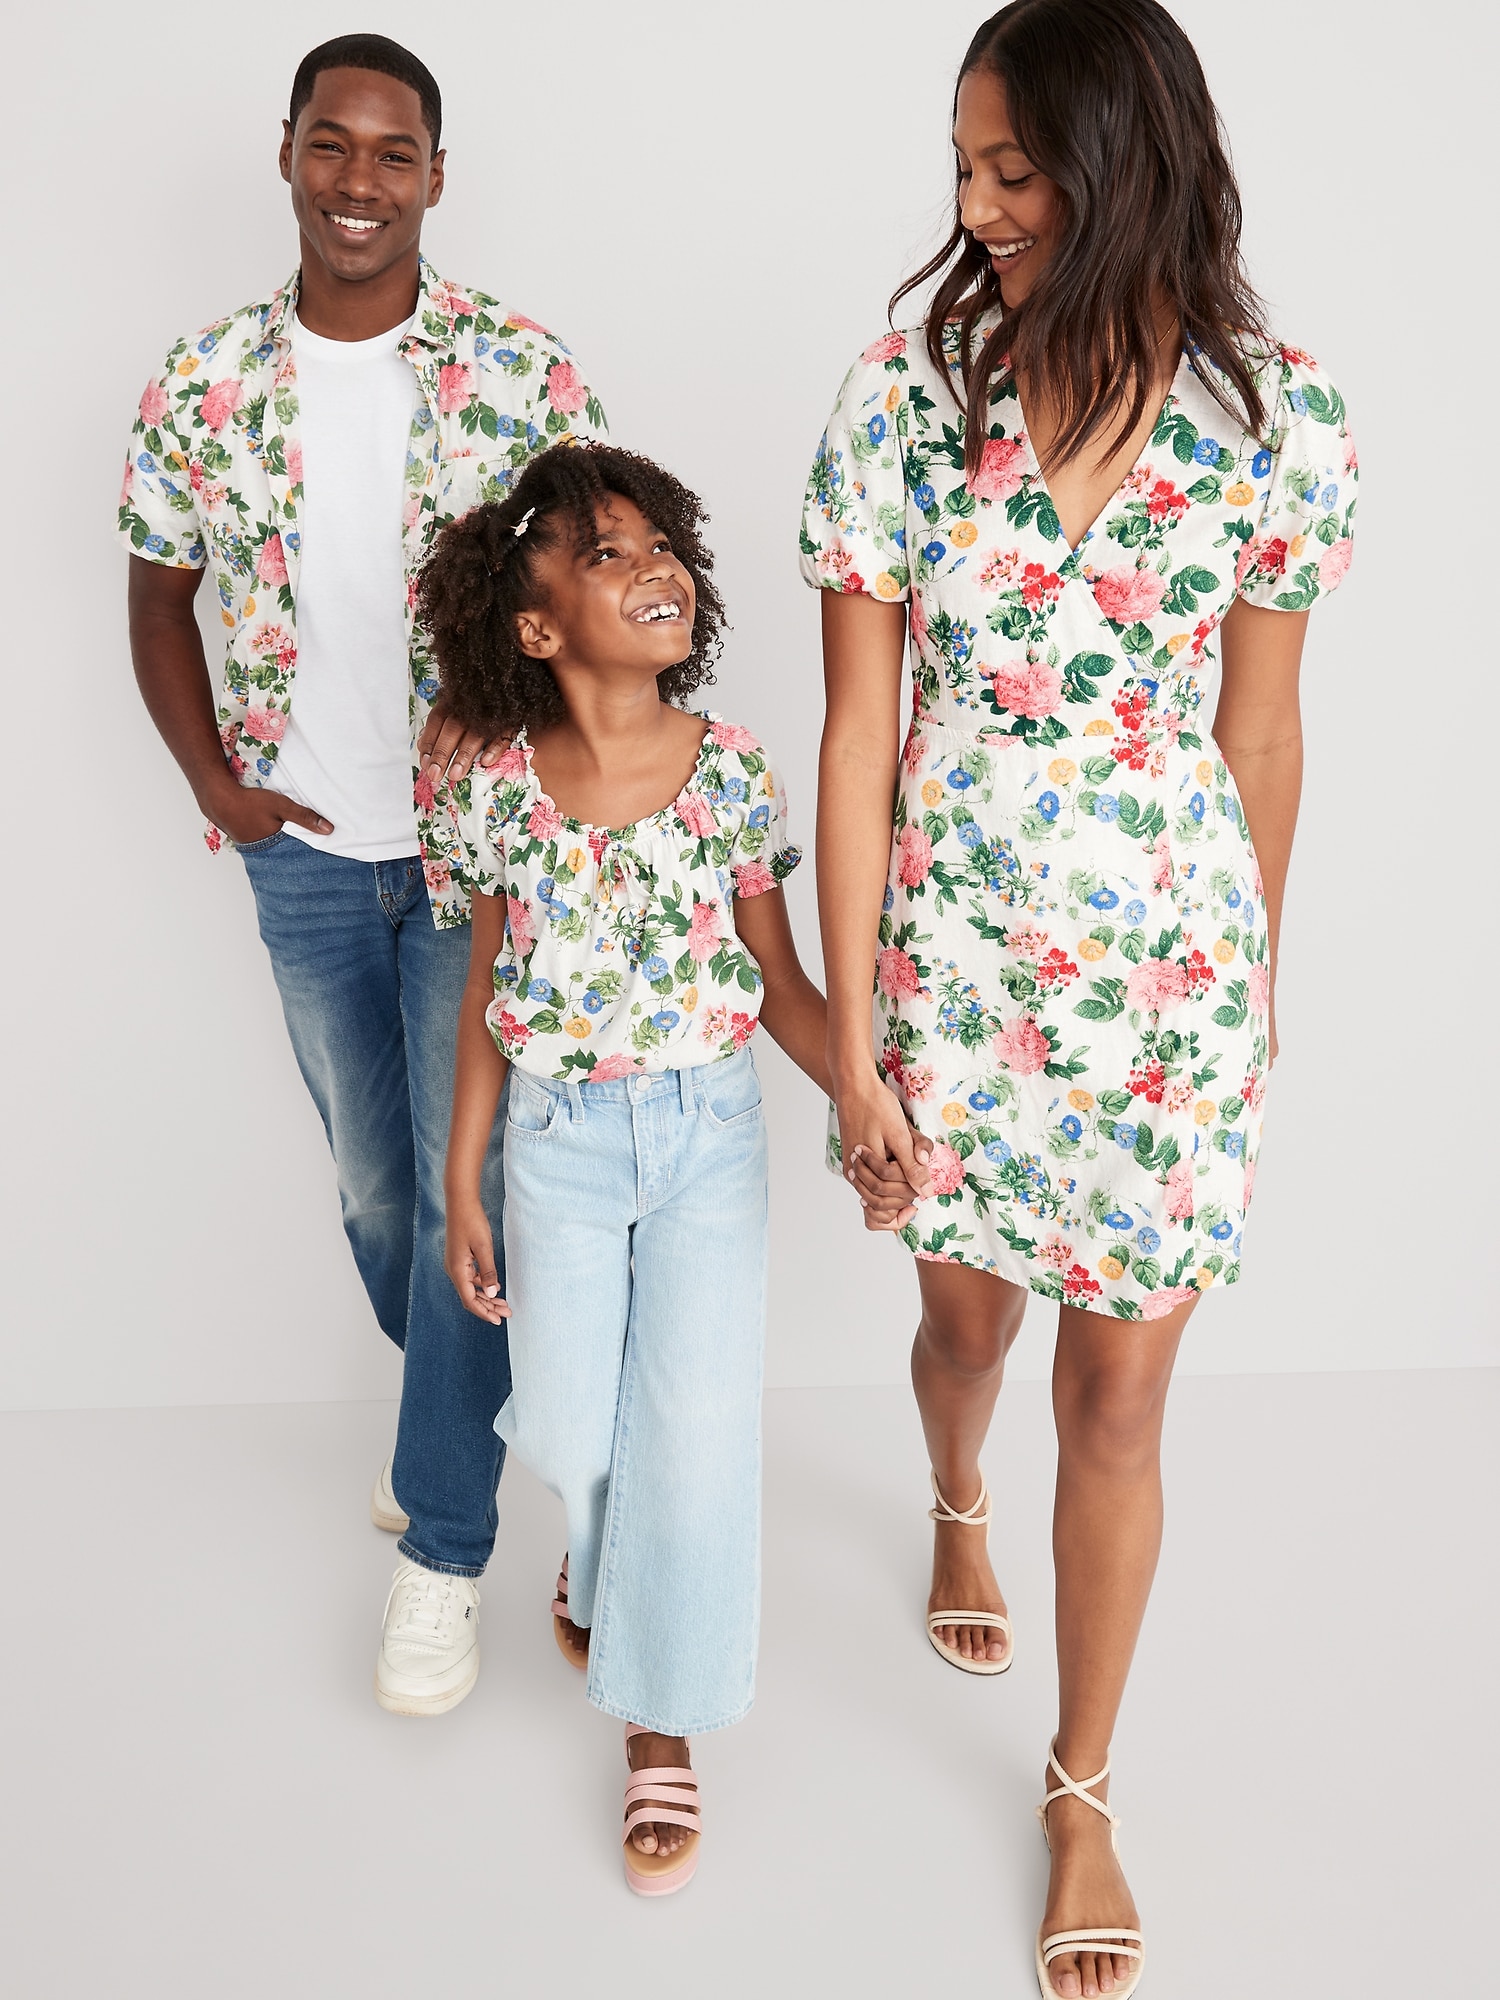 Old Navy Released a Line of Matching Family Outfits